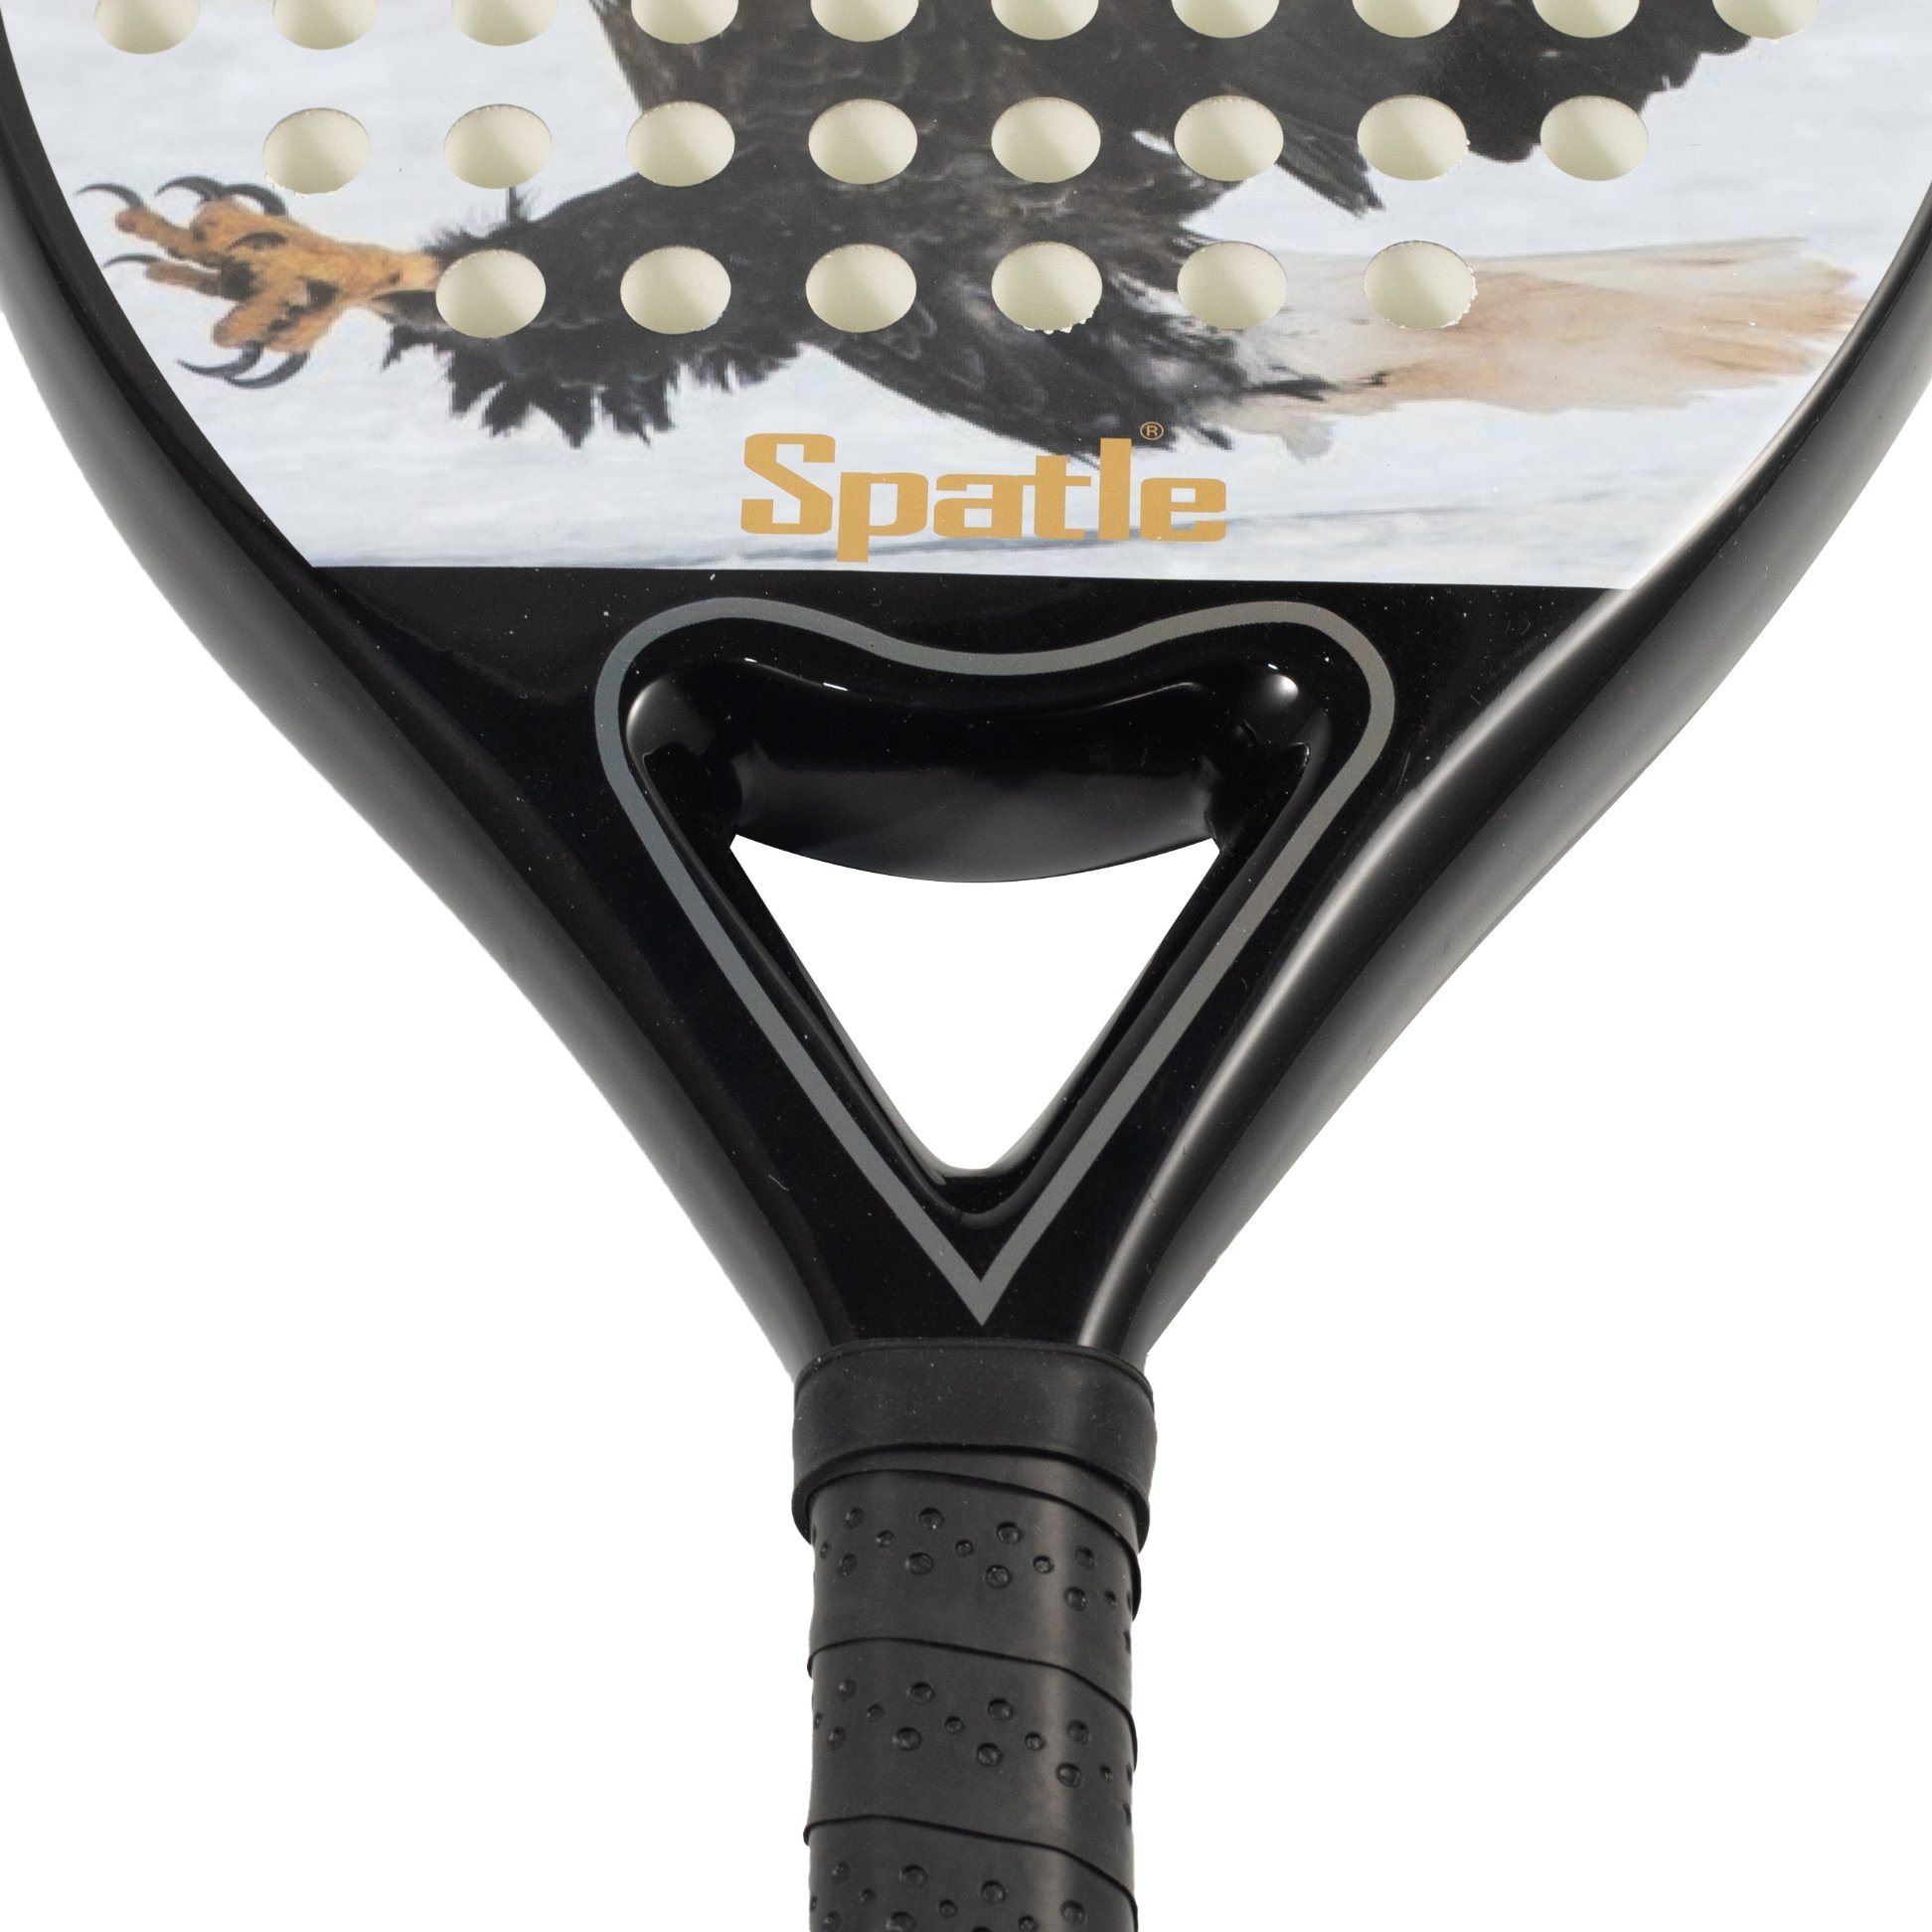 Customized Pala Paddle Racket With Glass fiber material